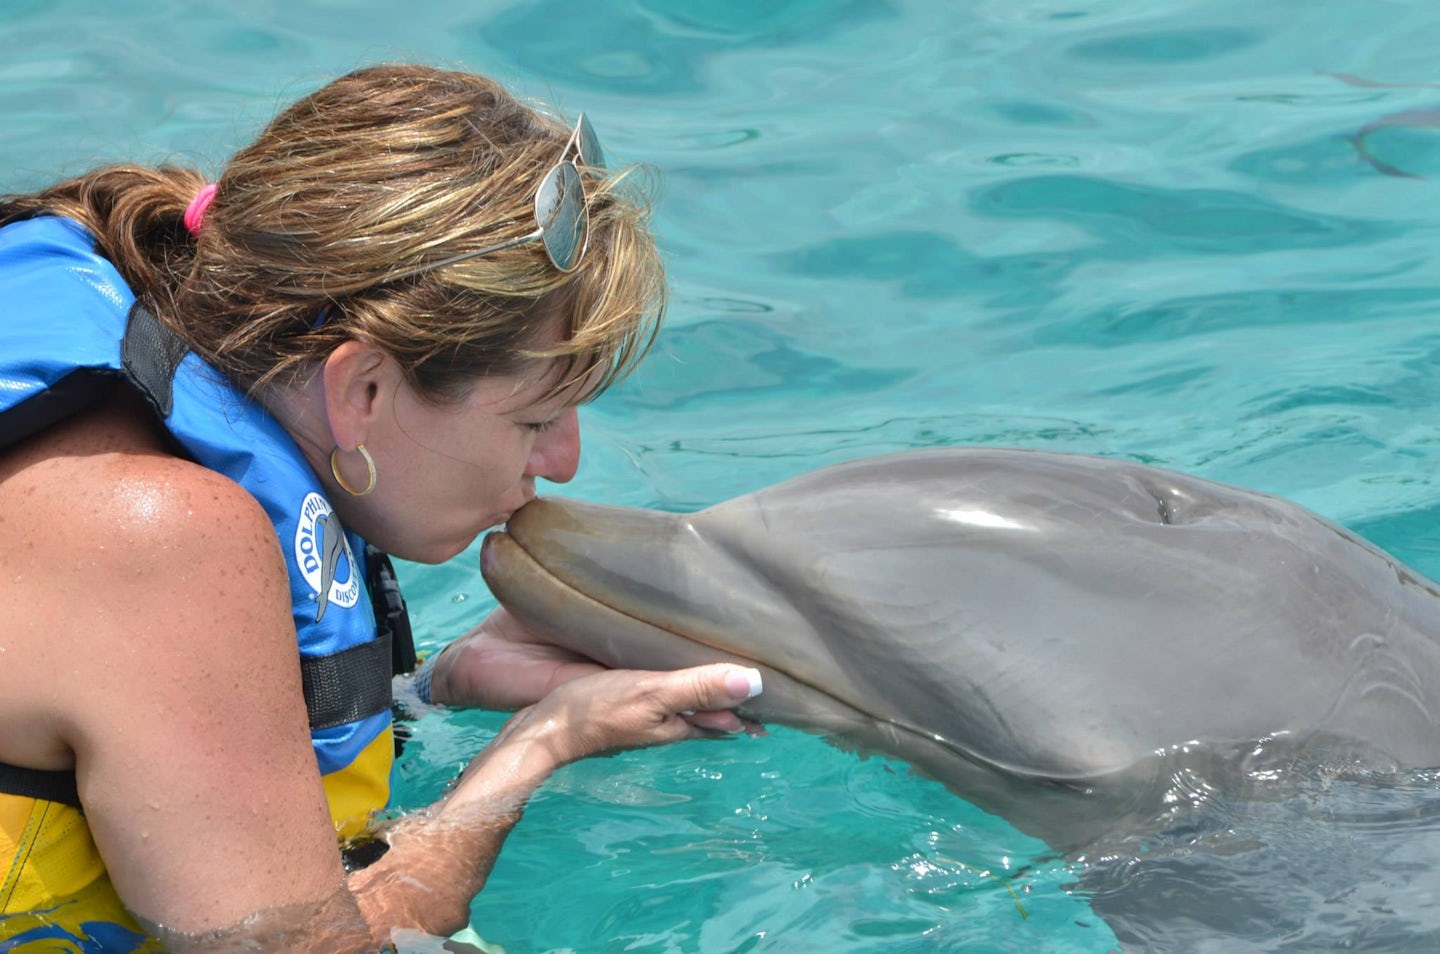 Sonja swimming with the dolphins in Cozumel, Mexico at Chankanaab Adventure